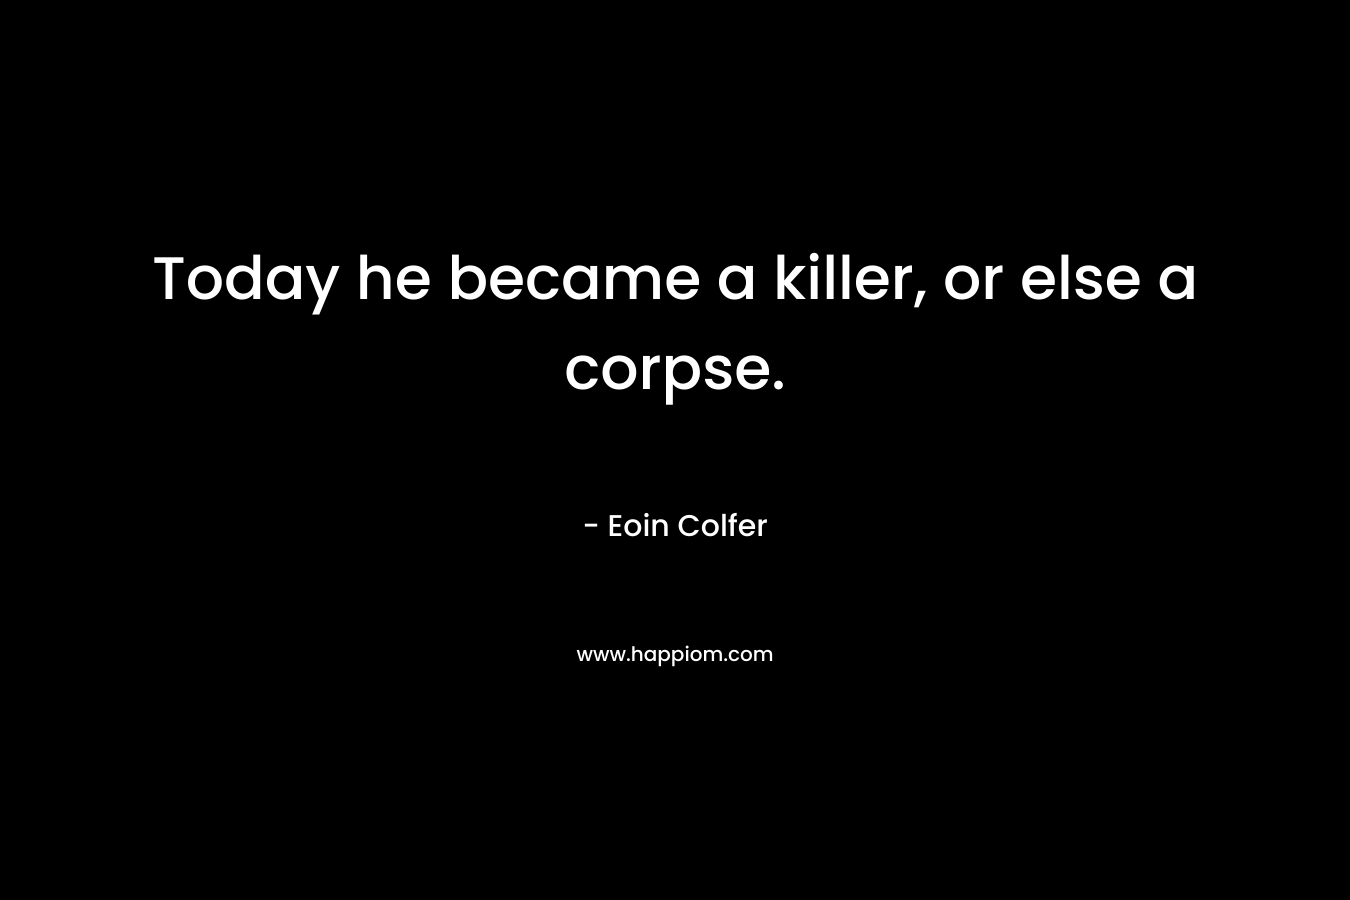 Today he became a killer, or else a corpse.